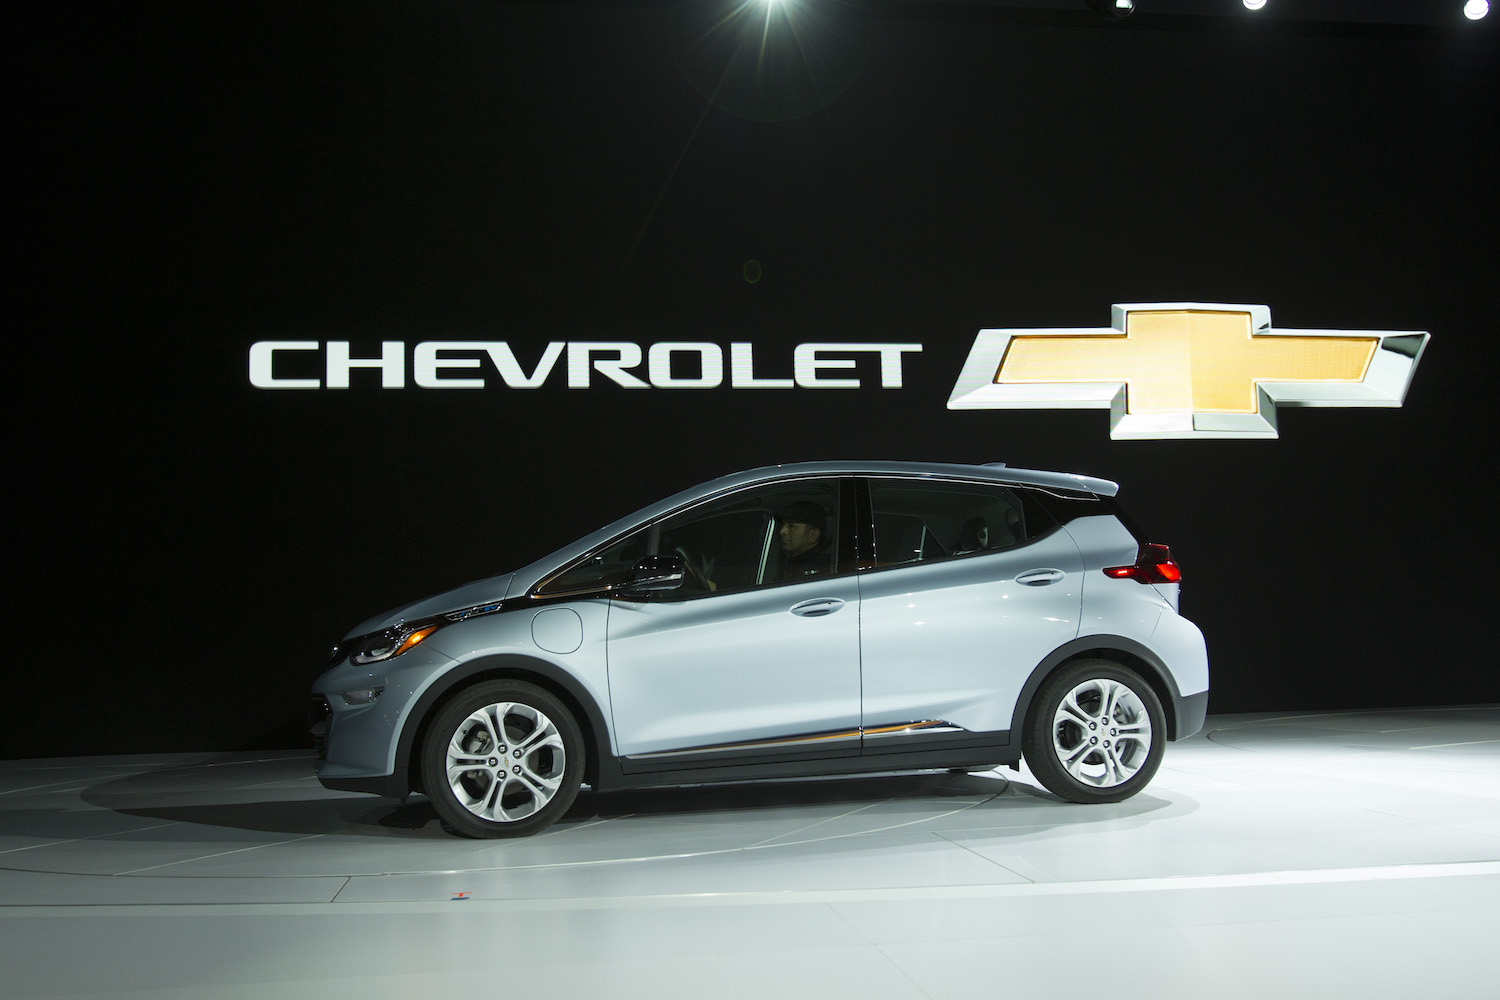 The Chevrolet Bolt drives onstage during a press conference at the 2017 North American International Auto Show in Detroit. Chris Pratt drives a 2017 Chevy Bolt in The Tomorrow War as part of GM's Ultium product placement | GEOFF ROBINS/AFP via Getty Images